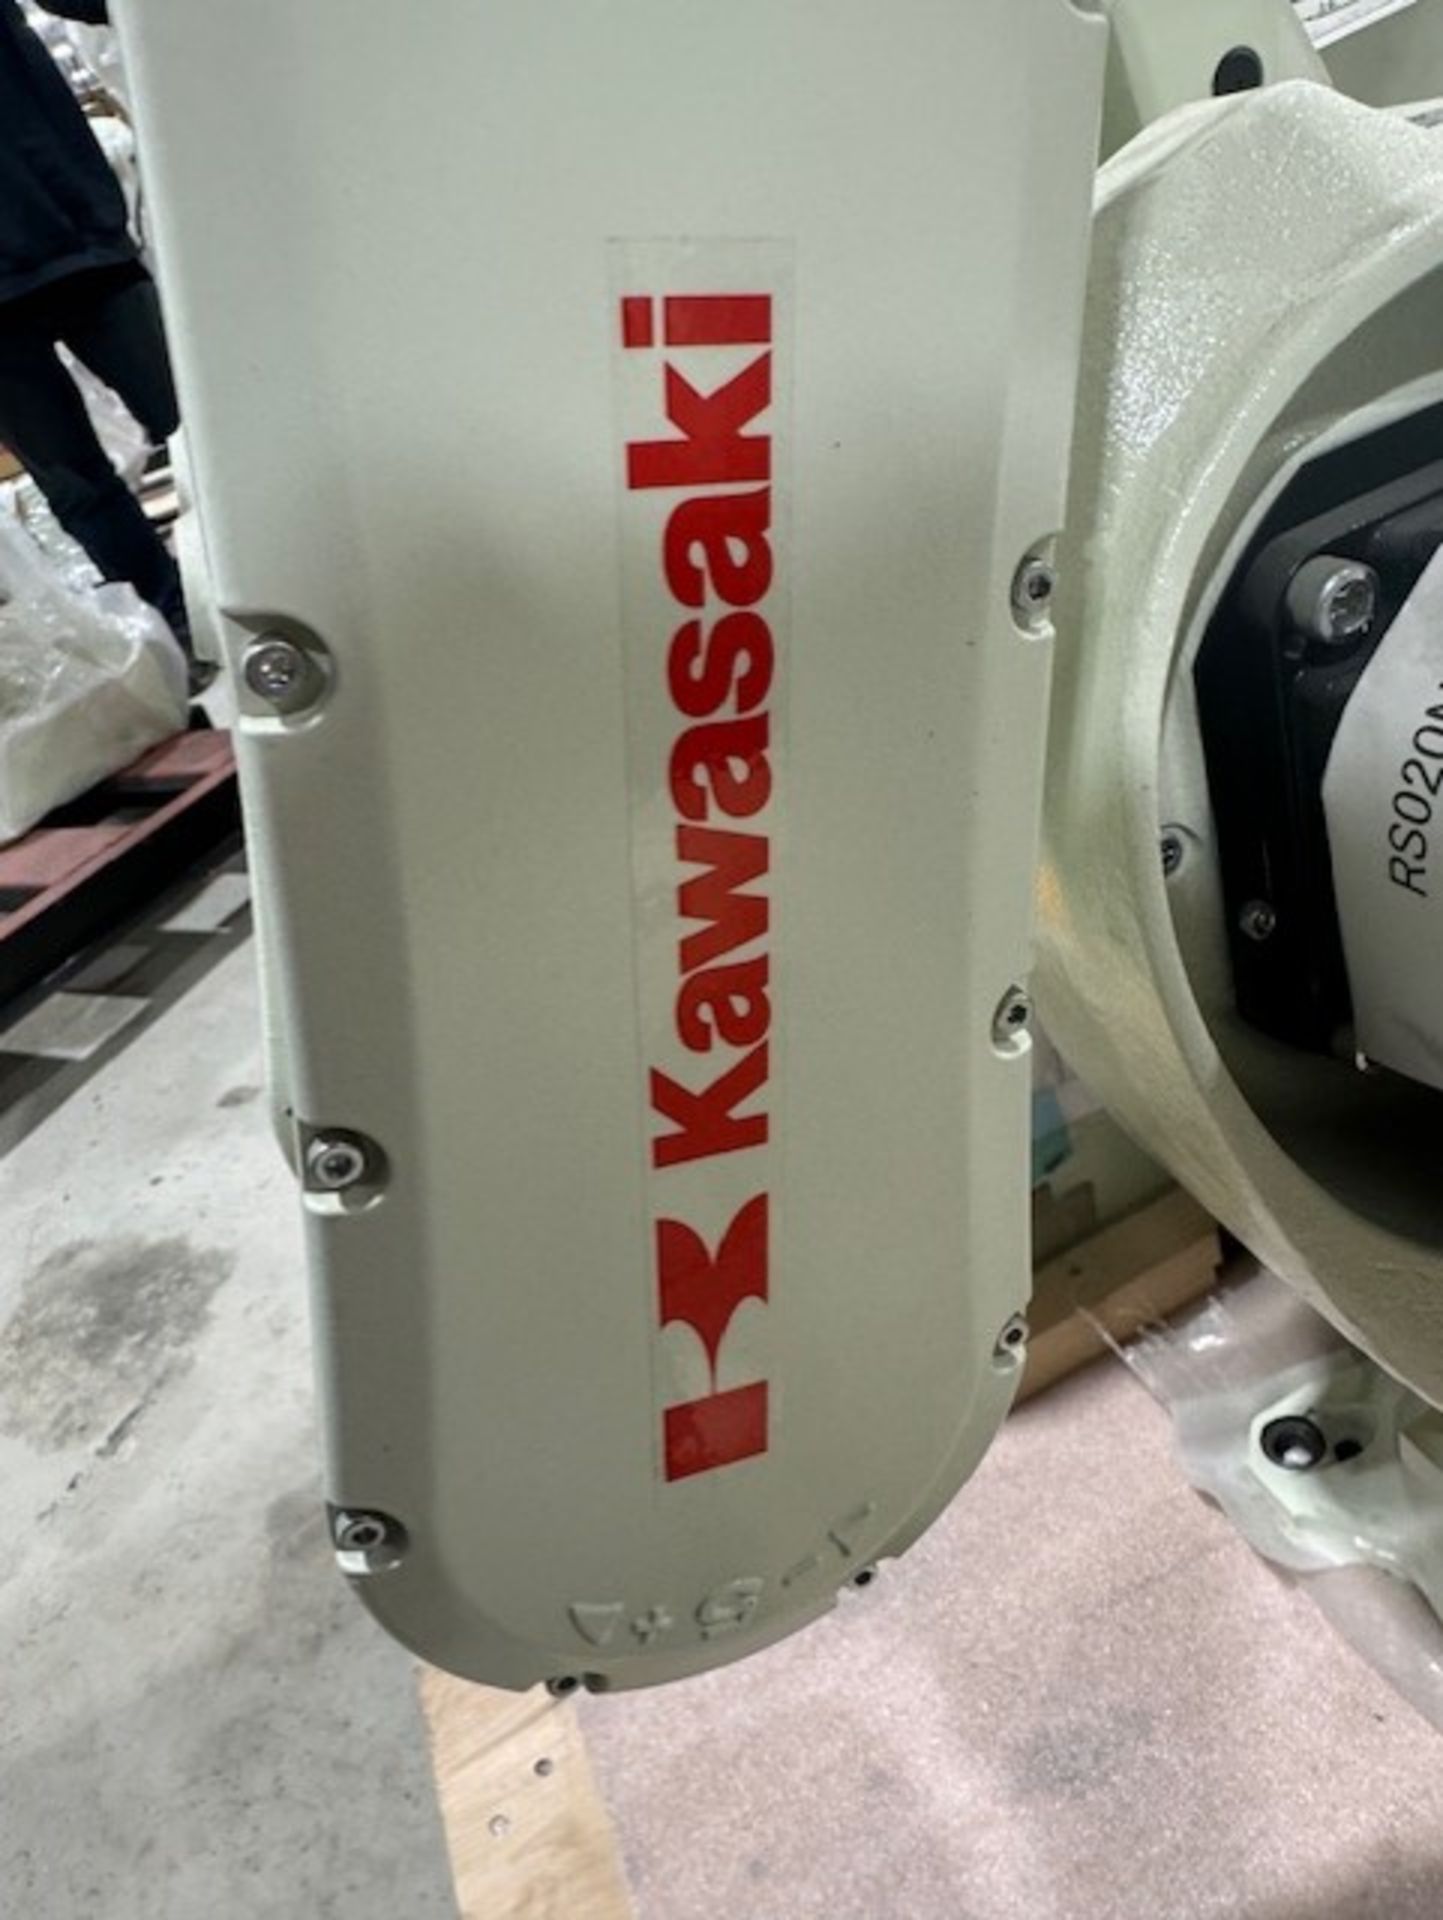 NEW KAWASAKI ROBOT MODEL RS020N, SN 4593, 20KG X 1725MM REACH WITH EO1 CONTROLS, CABLES & TEACH - Image 5 of 7